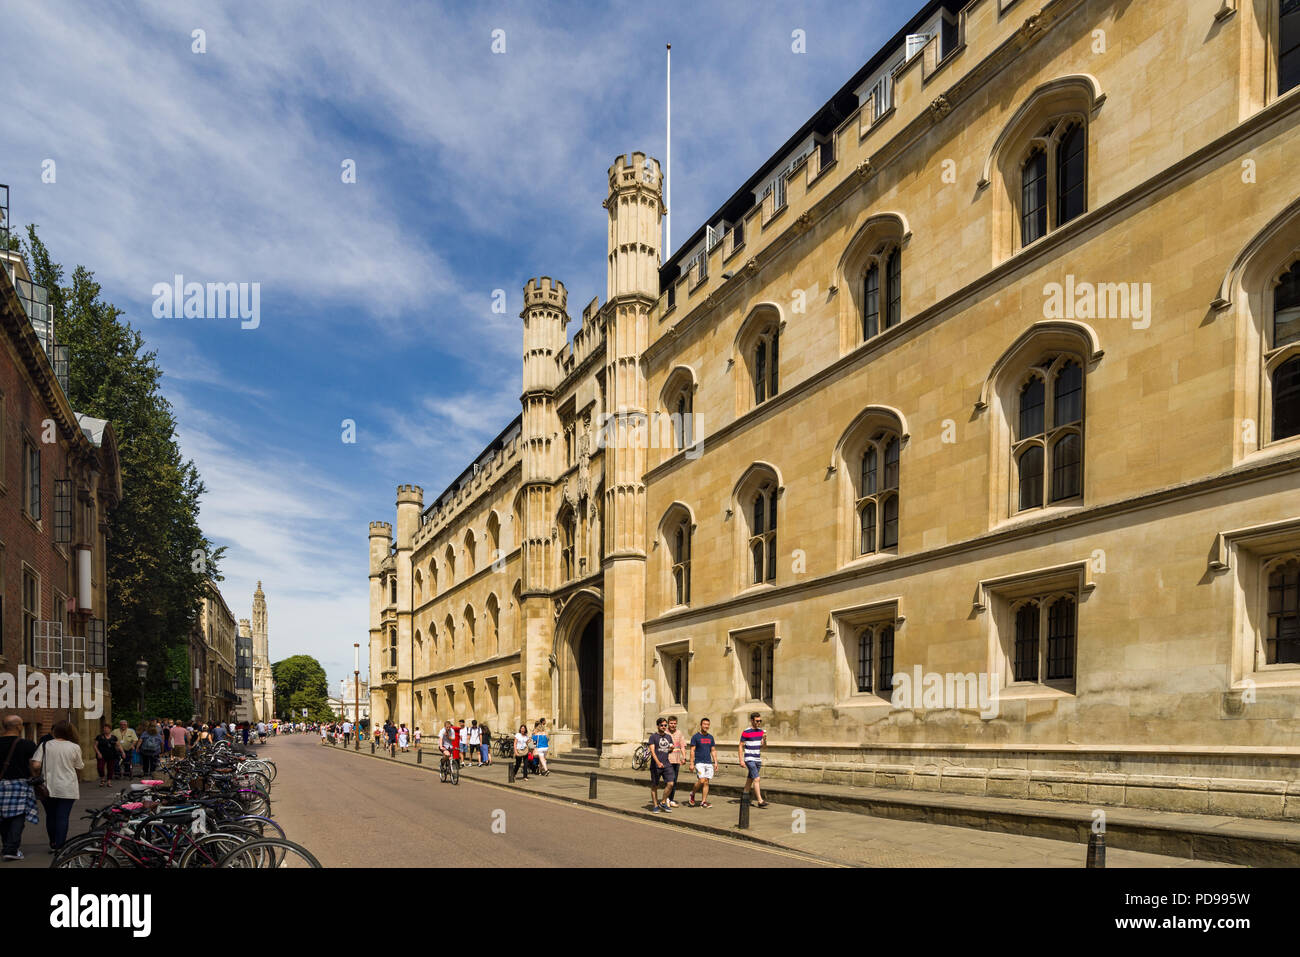 Exterior of Corpus Christi College from Trumpington Street with people walking on pavement outside, Cambridge, UK Stock Photo